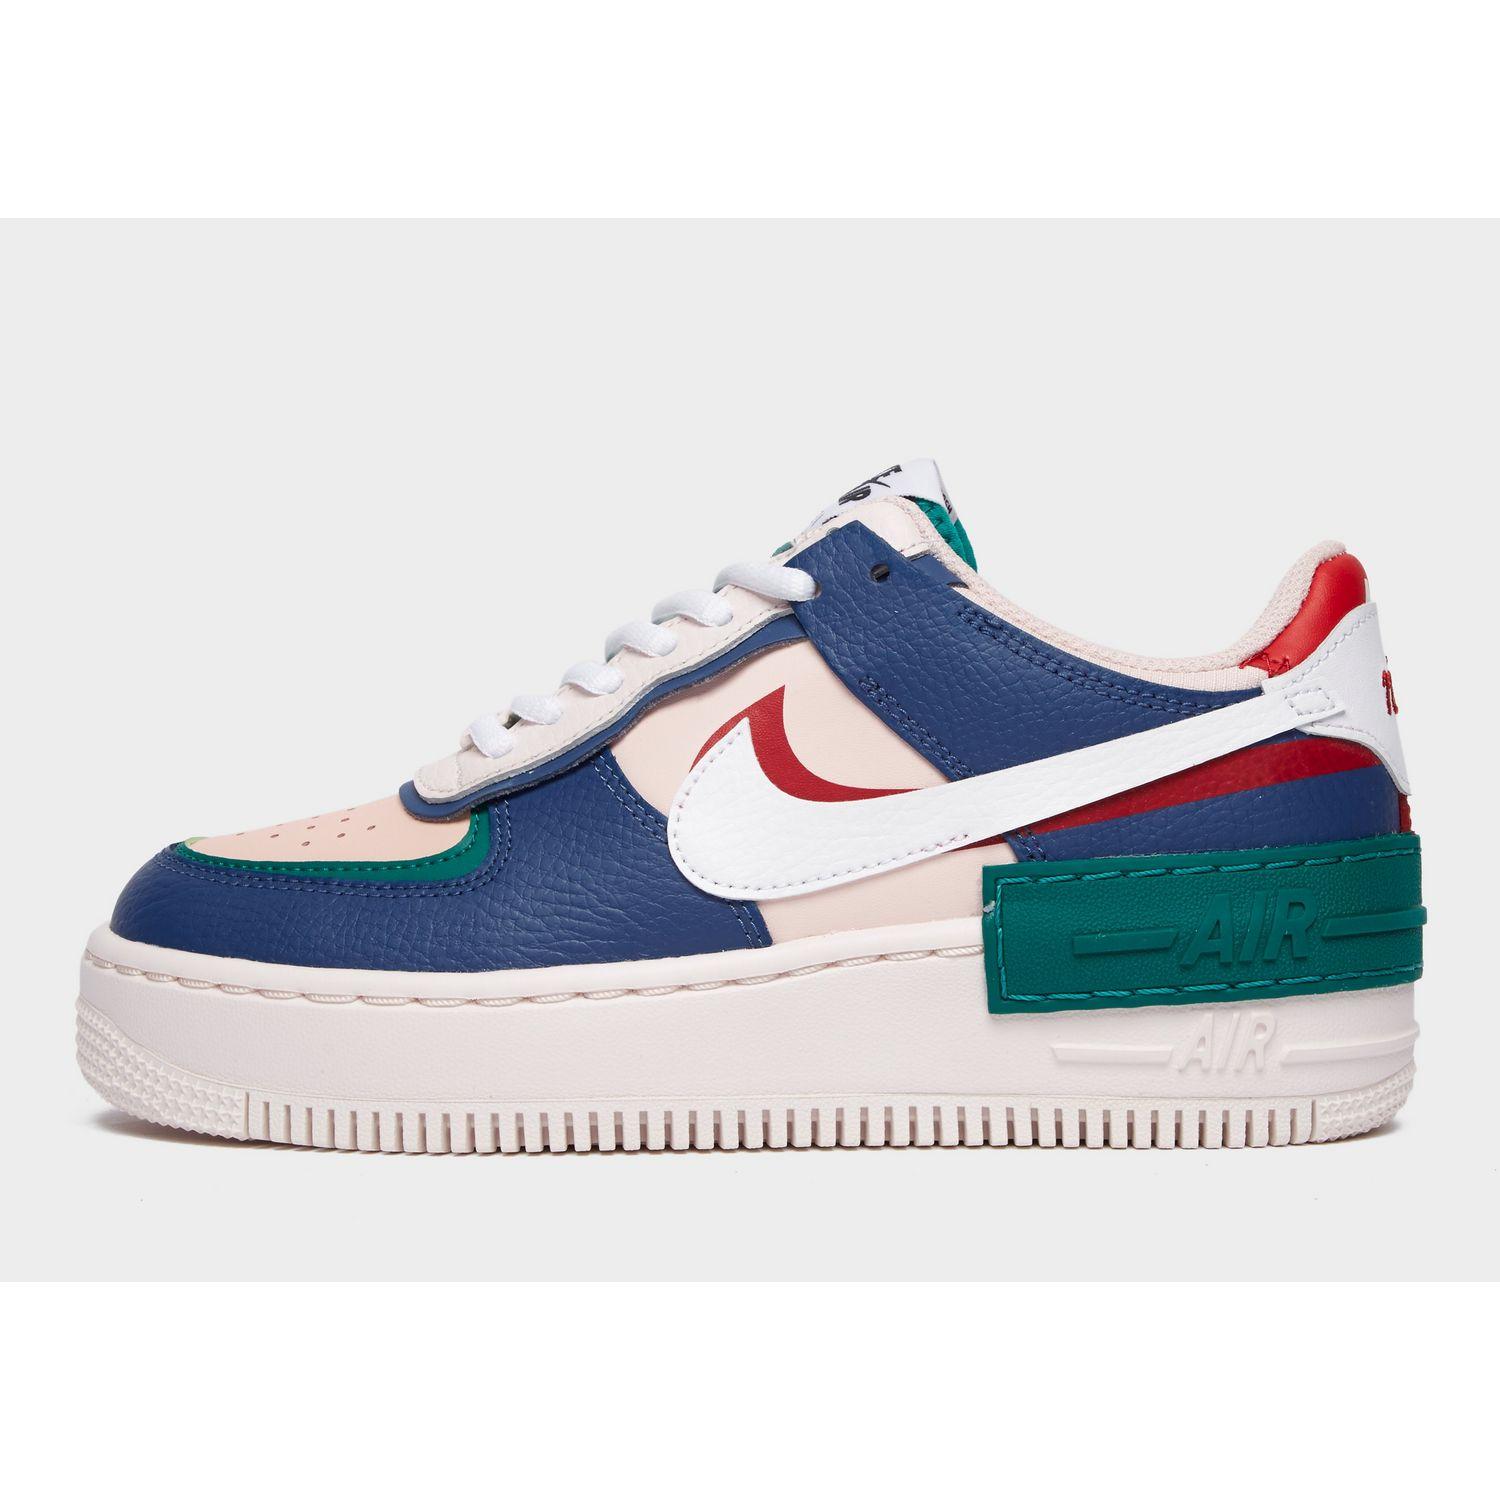 air force 1 pink green blue